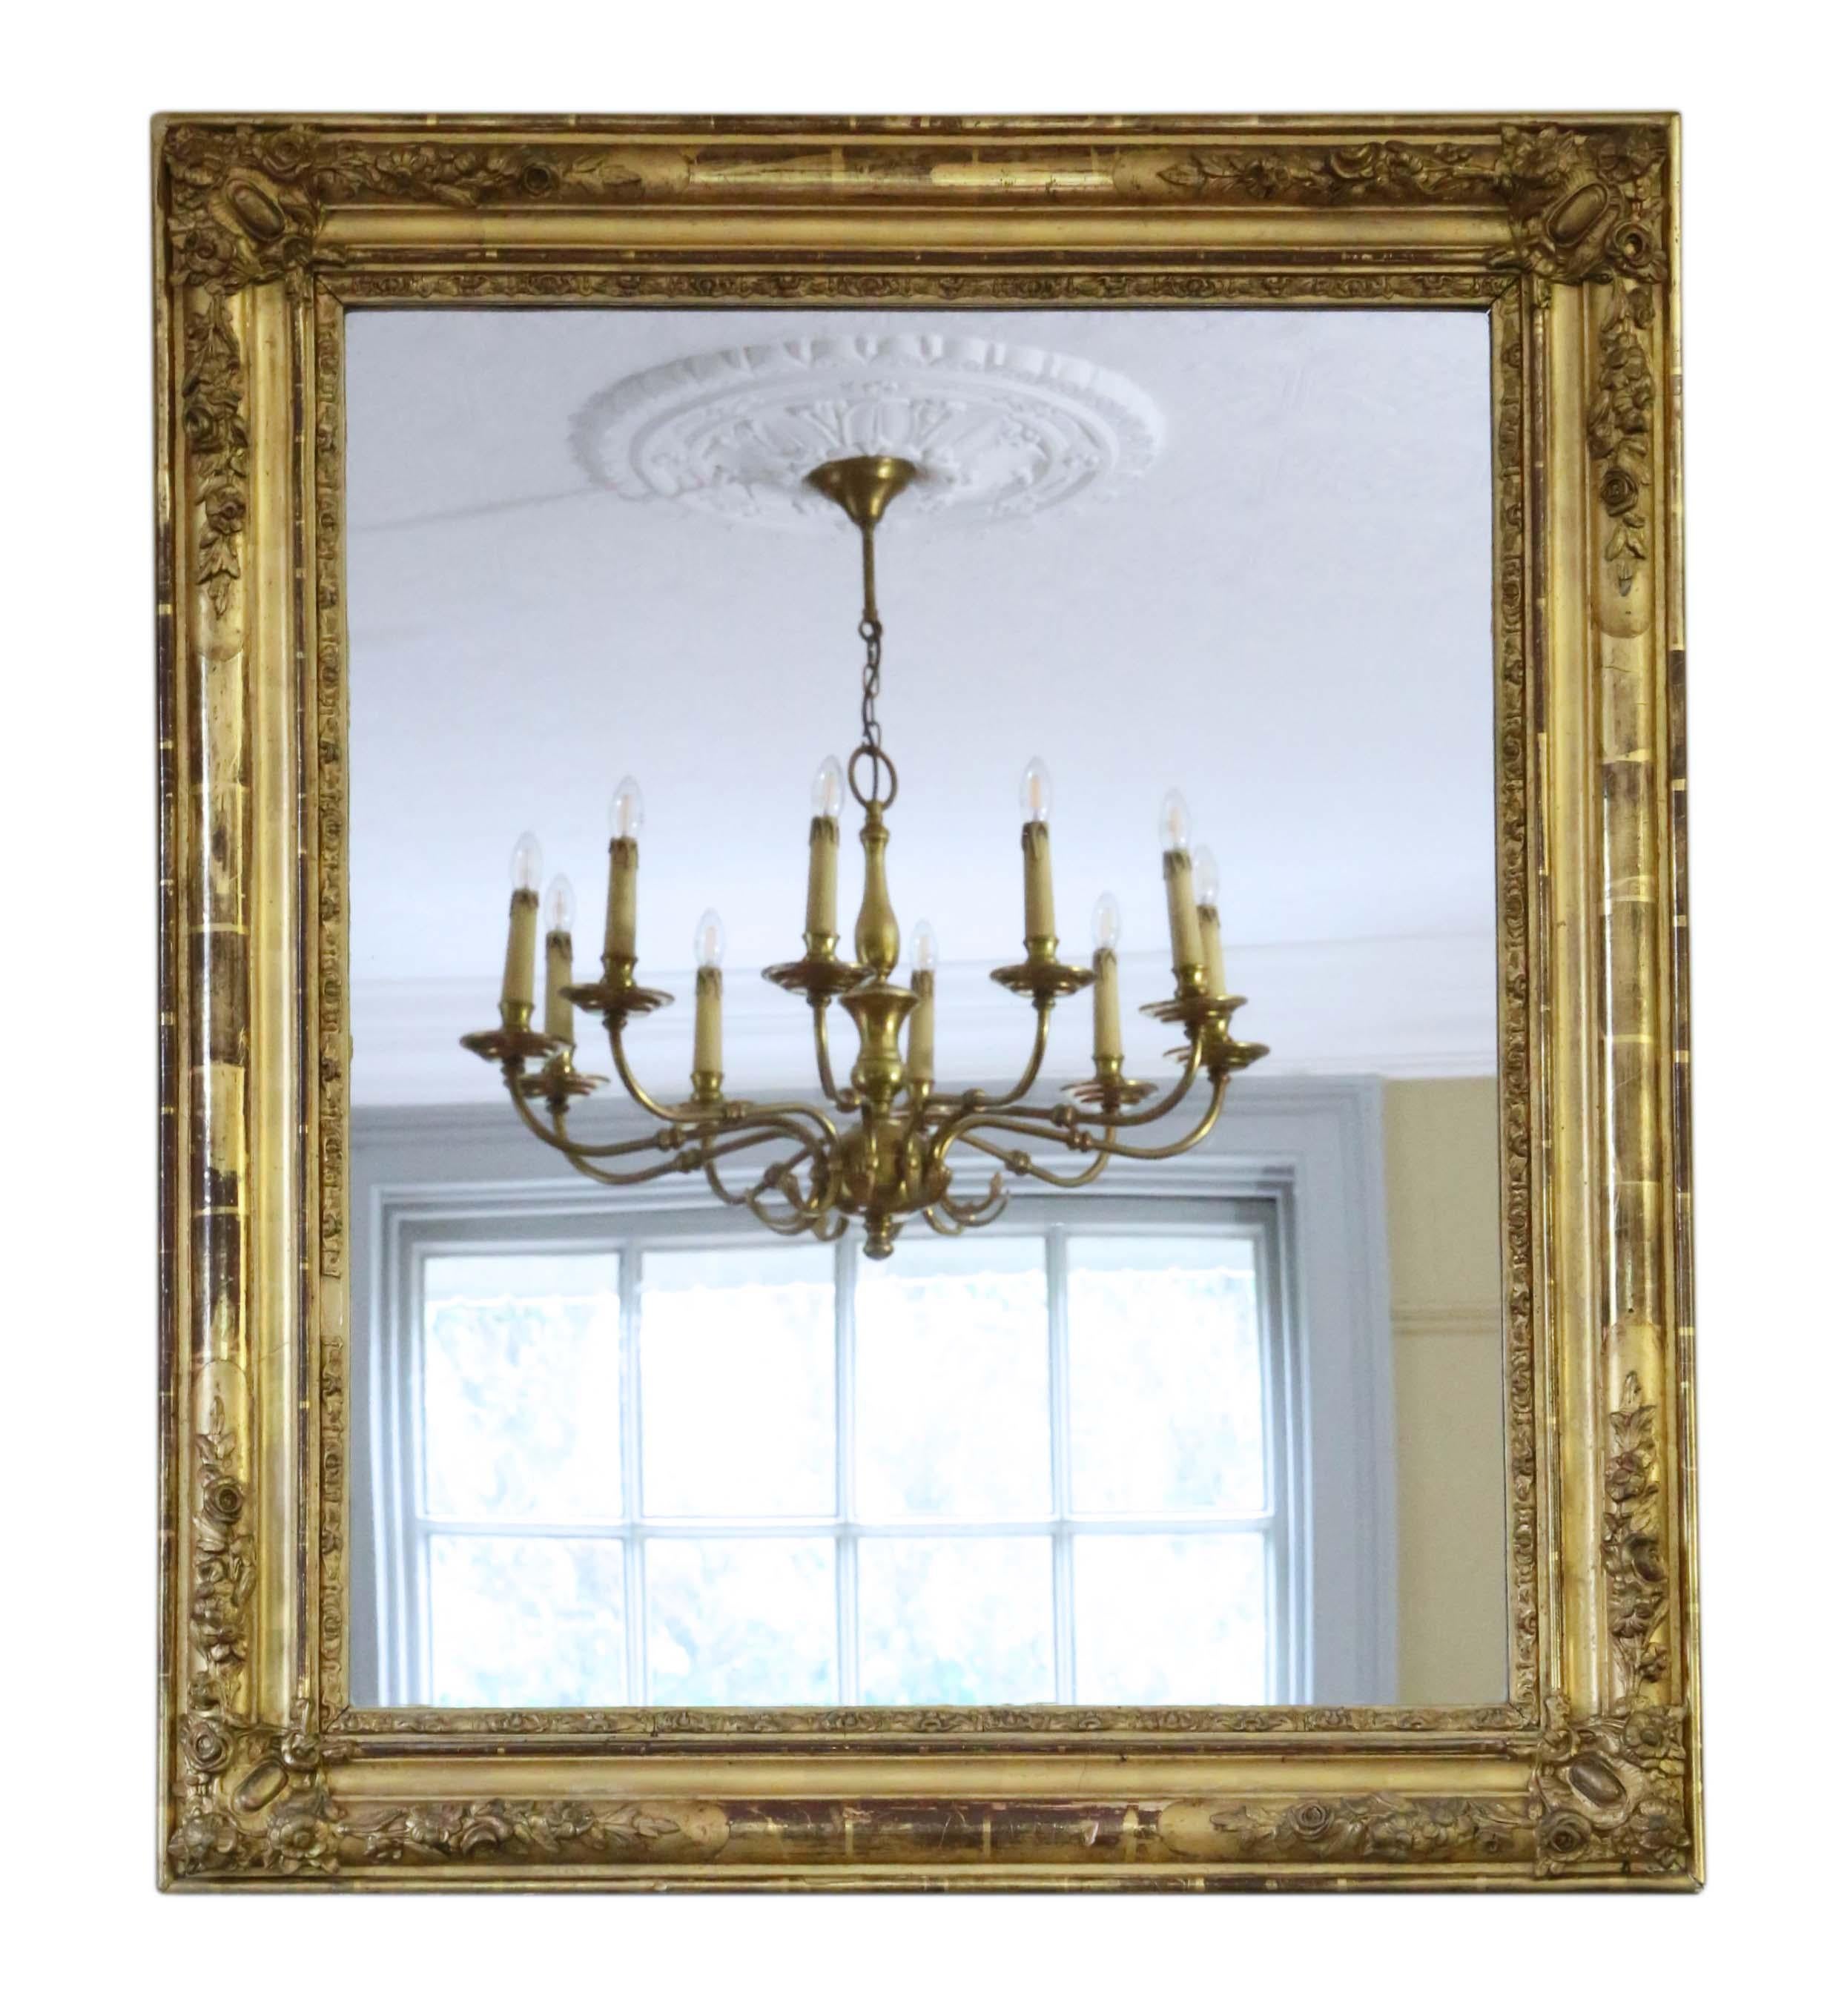 Antique rare large quality 19th century gilt overmantle or wall mirror. The mirror has its original glass and back. The frame has its beautiful original gilt finish with minor losses and touching up here and there.

An impressive find, that would